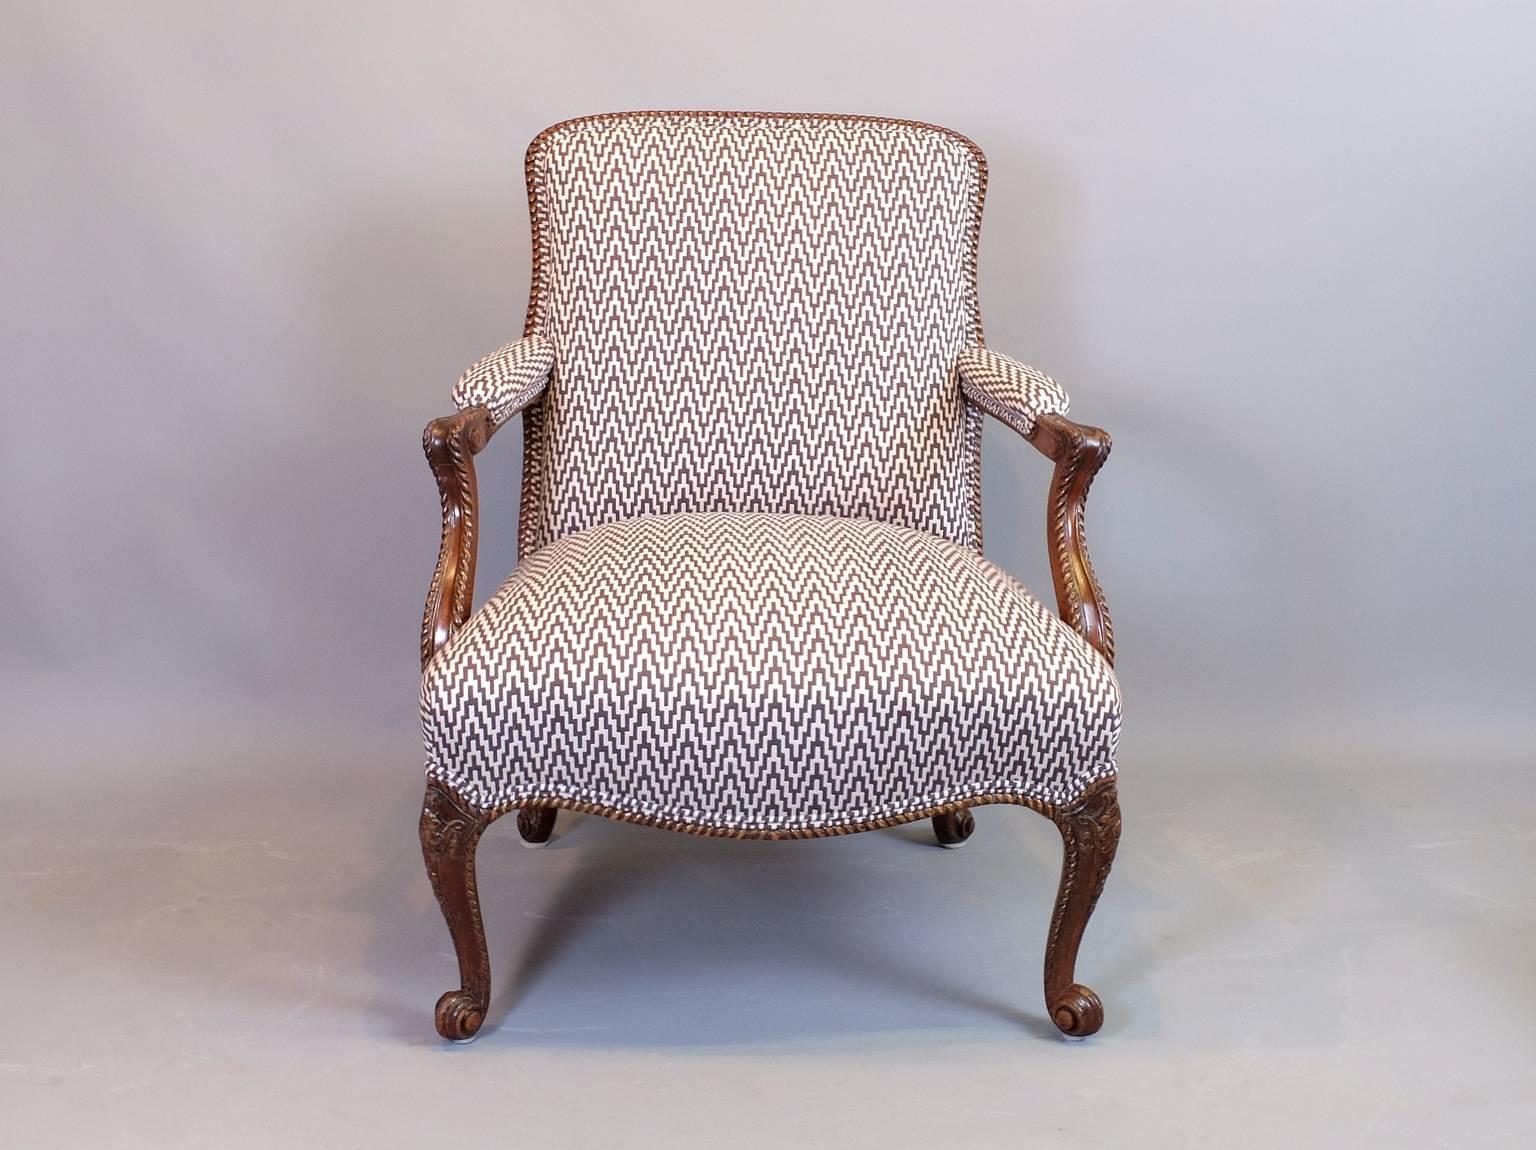 A pair of carved mahogany English library chairs, circa 1900 that have been re-upholstered in a contemporary fabric. These are high quality chairs with well carved frames and cabriole front and rear legs. The panelled and framed backs make these